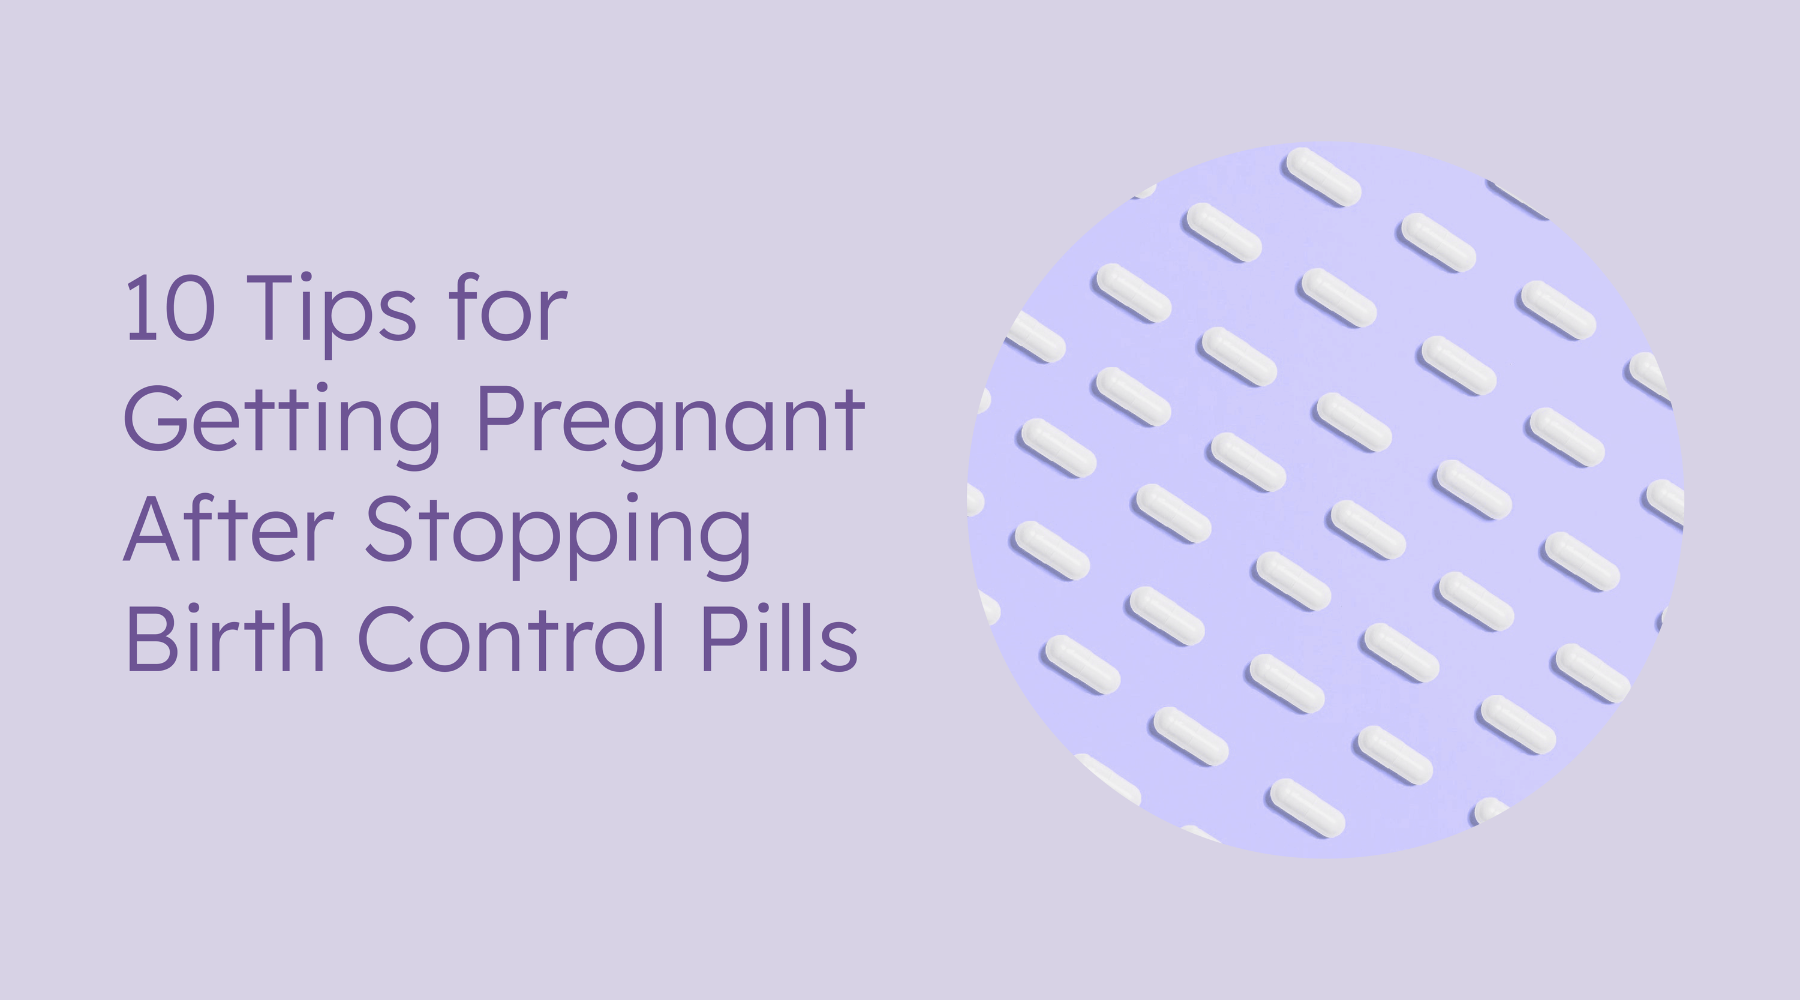 10 Tips for Getting Pregnant After Stopping Birth Control Pills